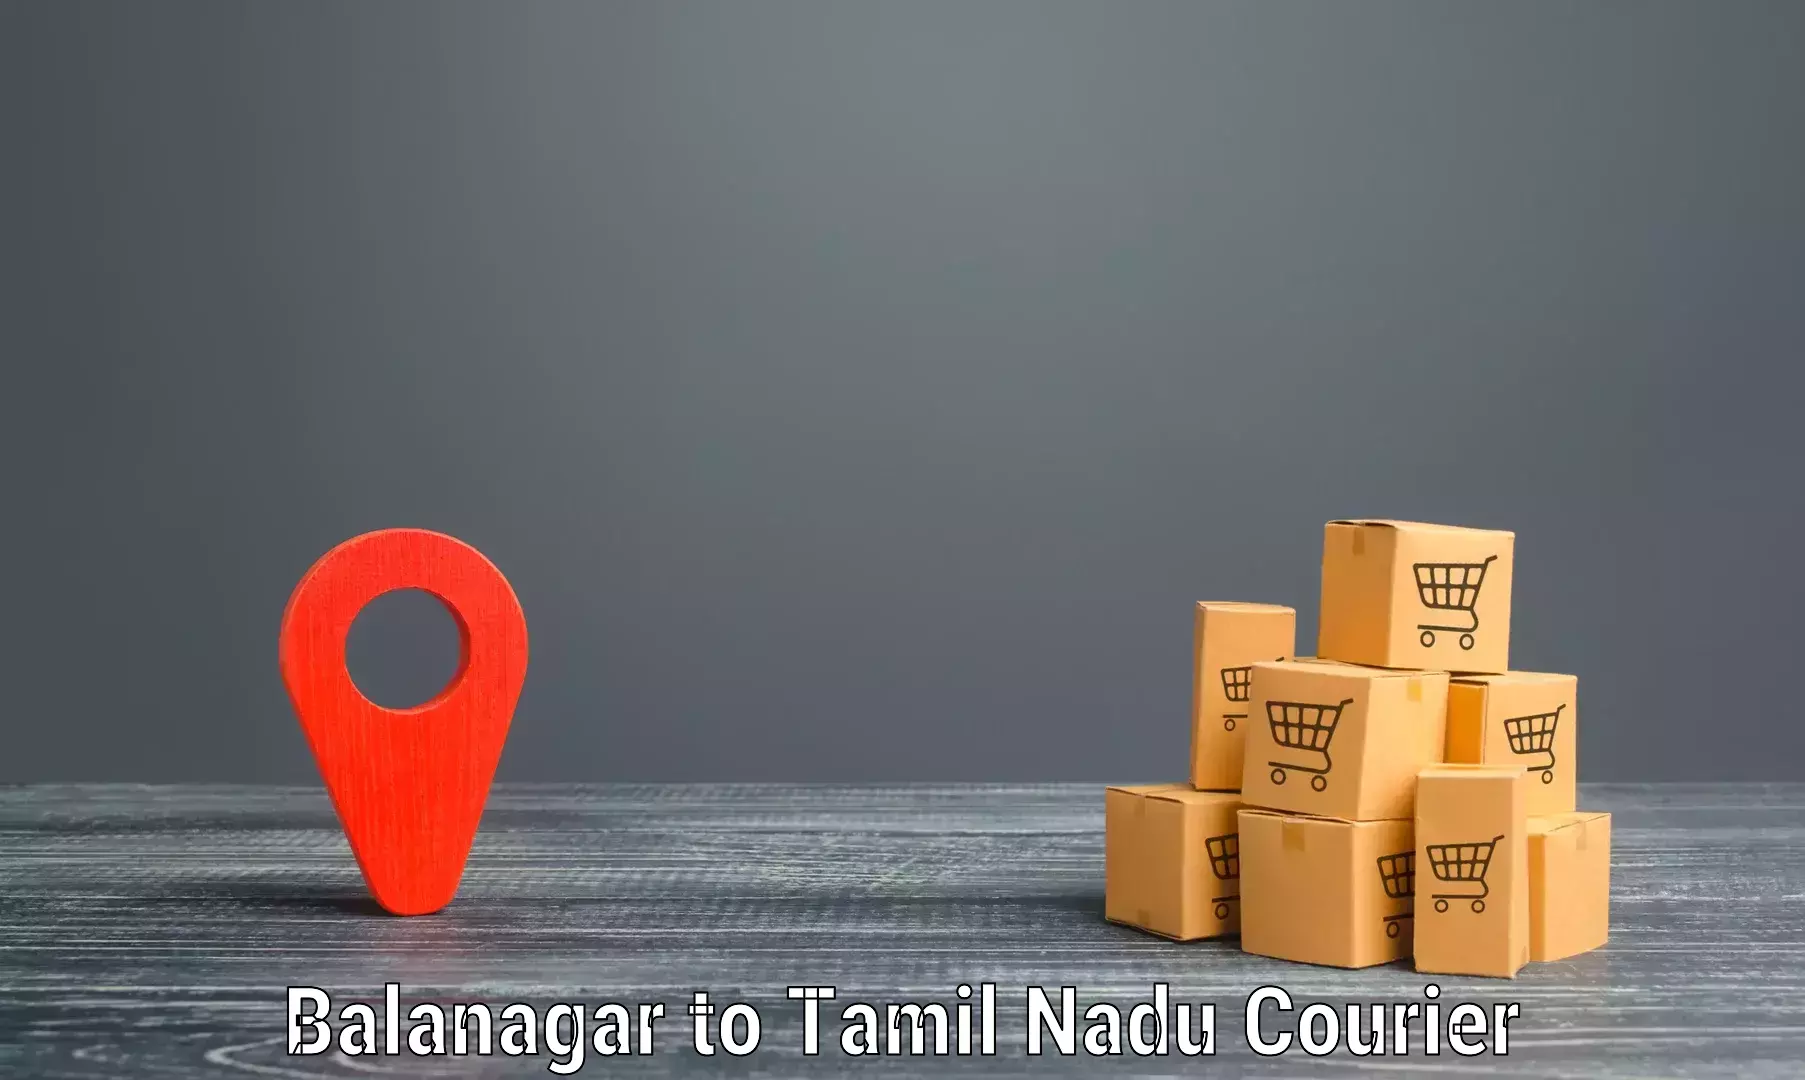 Reliable freight solutions Balanagar to Ennore Port Chennai